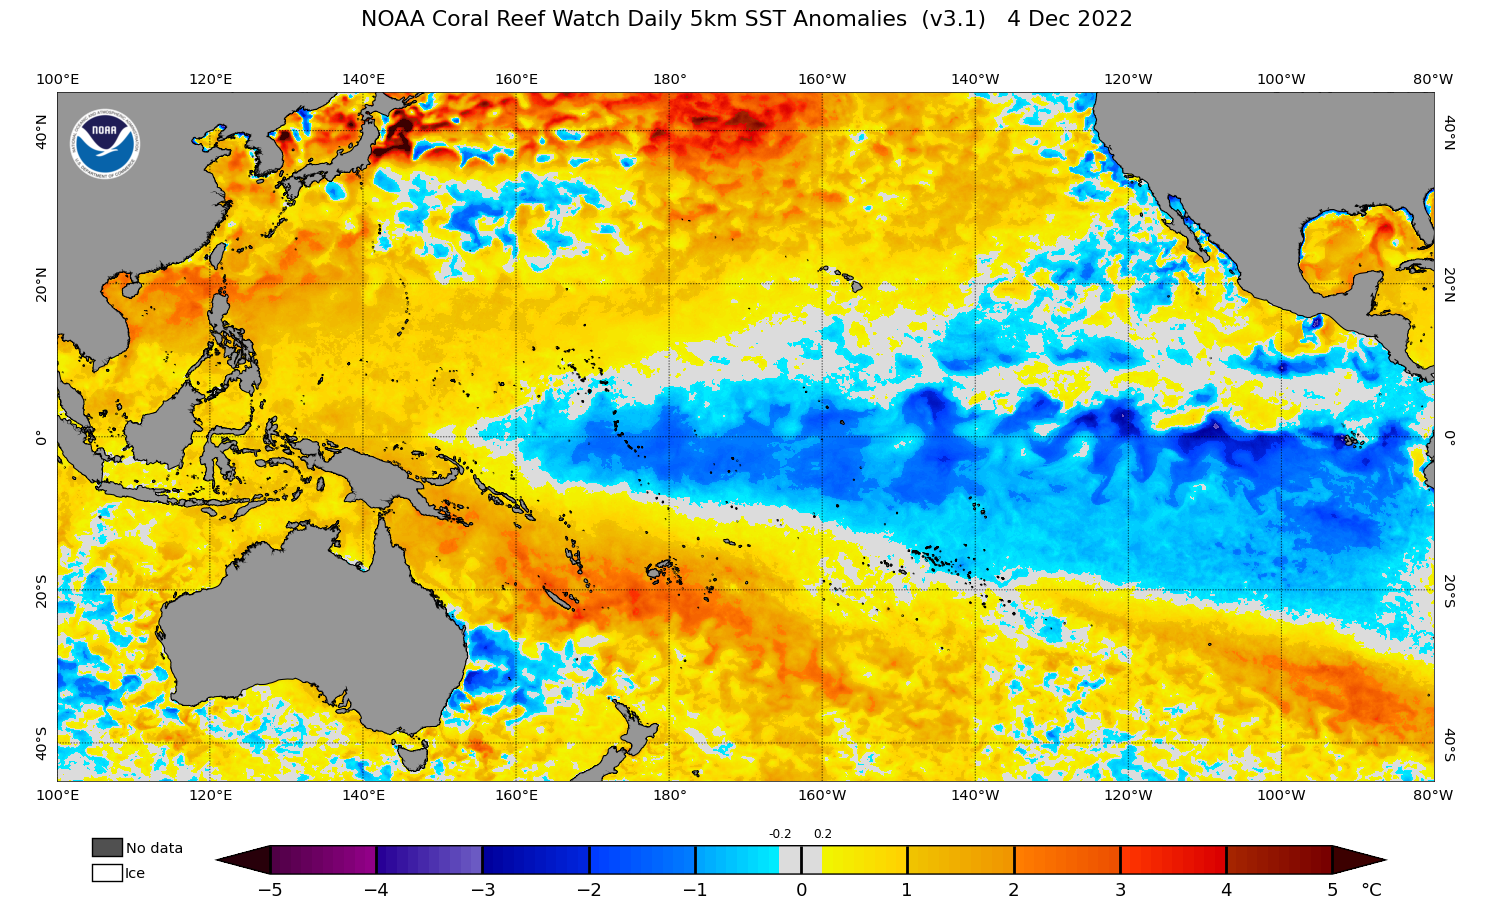 2022 Dec 04 SST Anomaly map for the Pacific Ocean